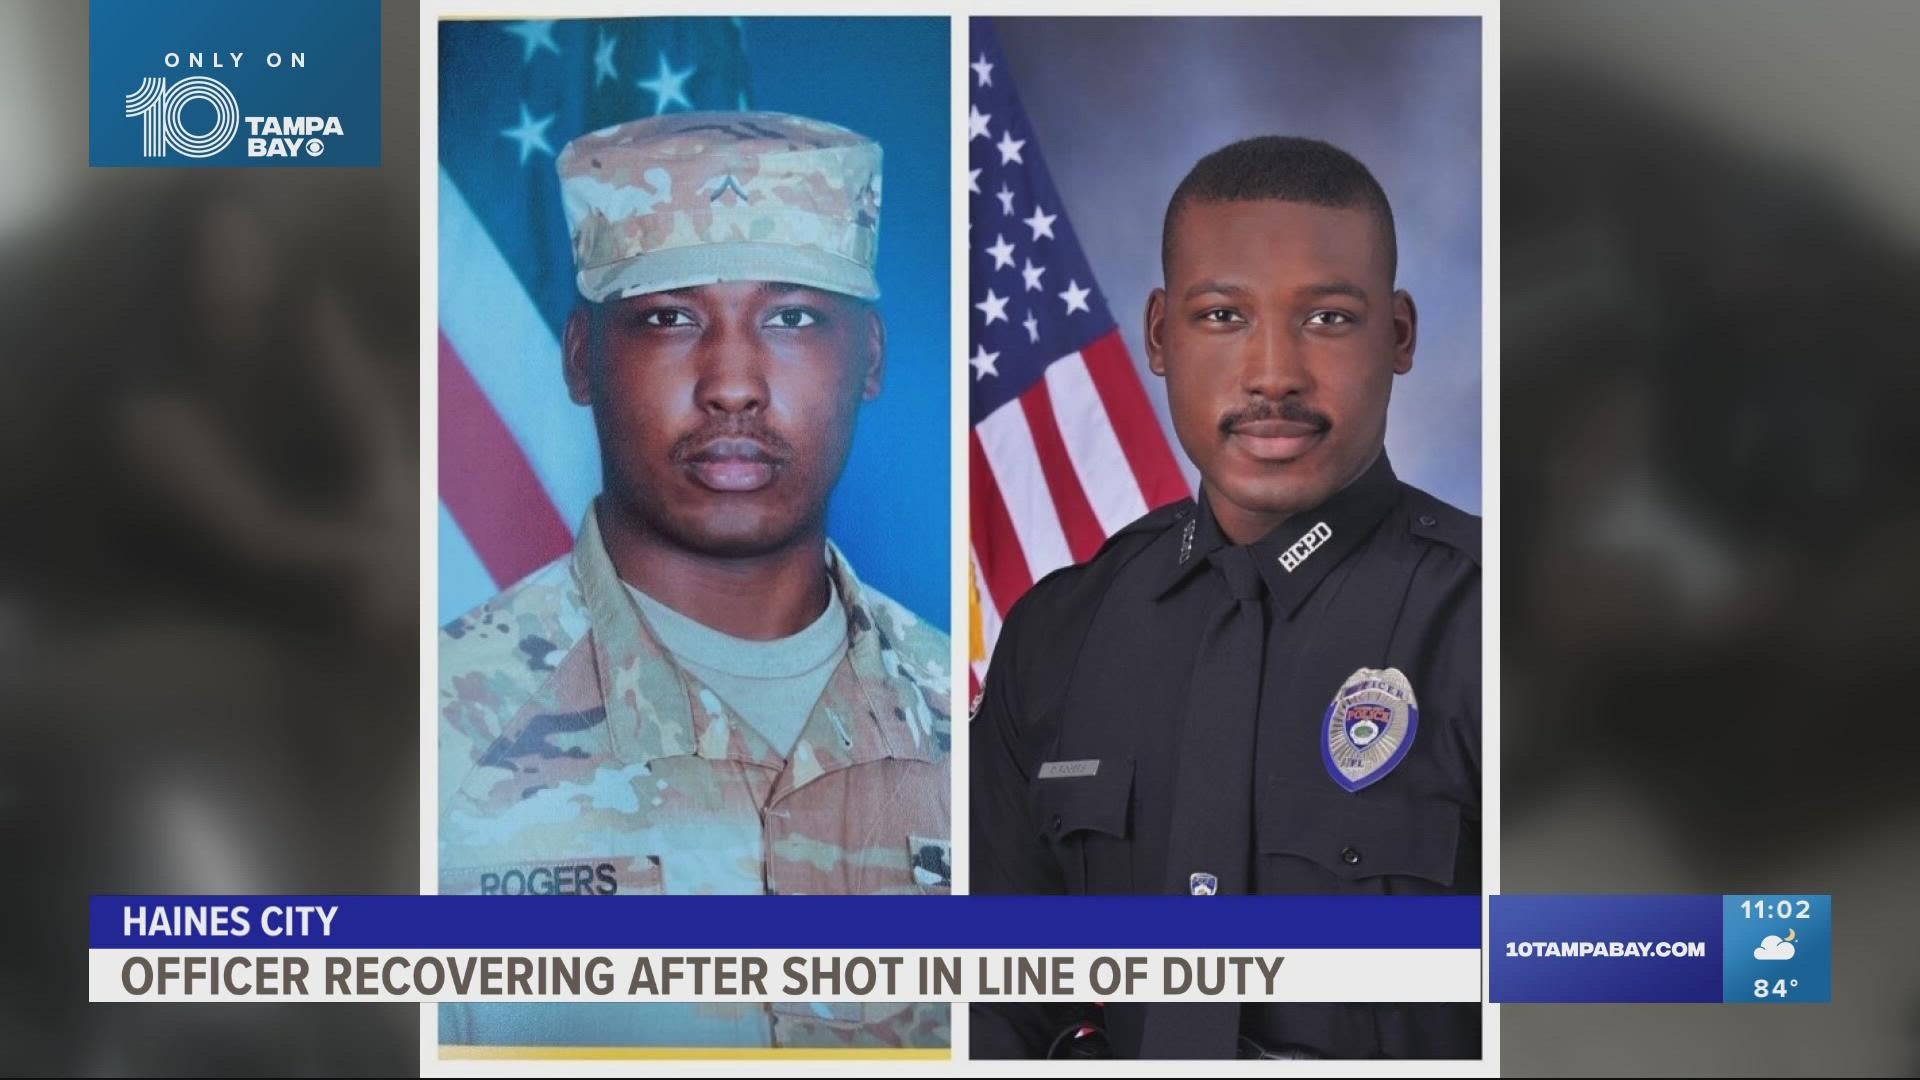 The police officer said he remembers laying there thinking, "this really happened to me."